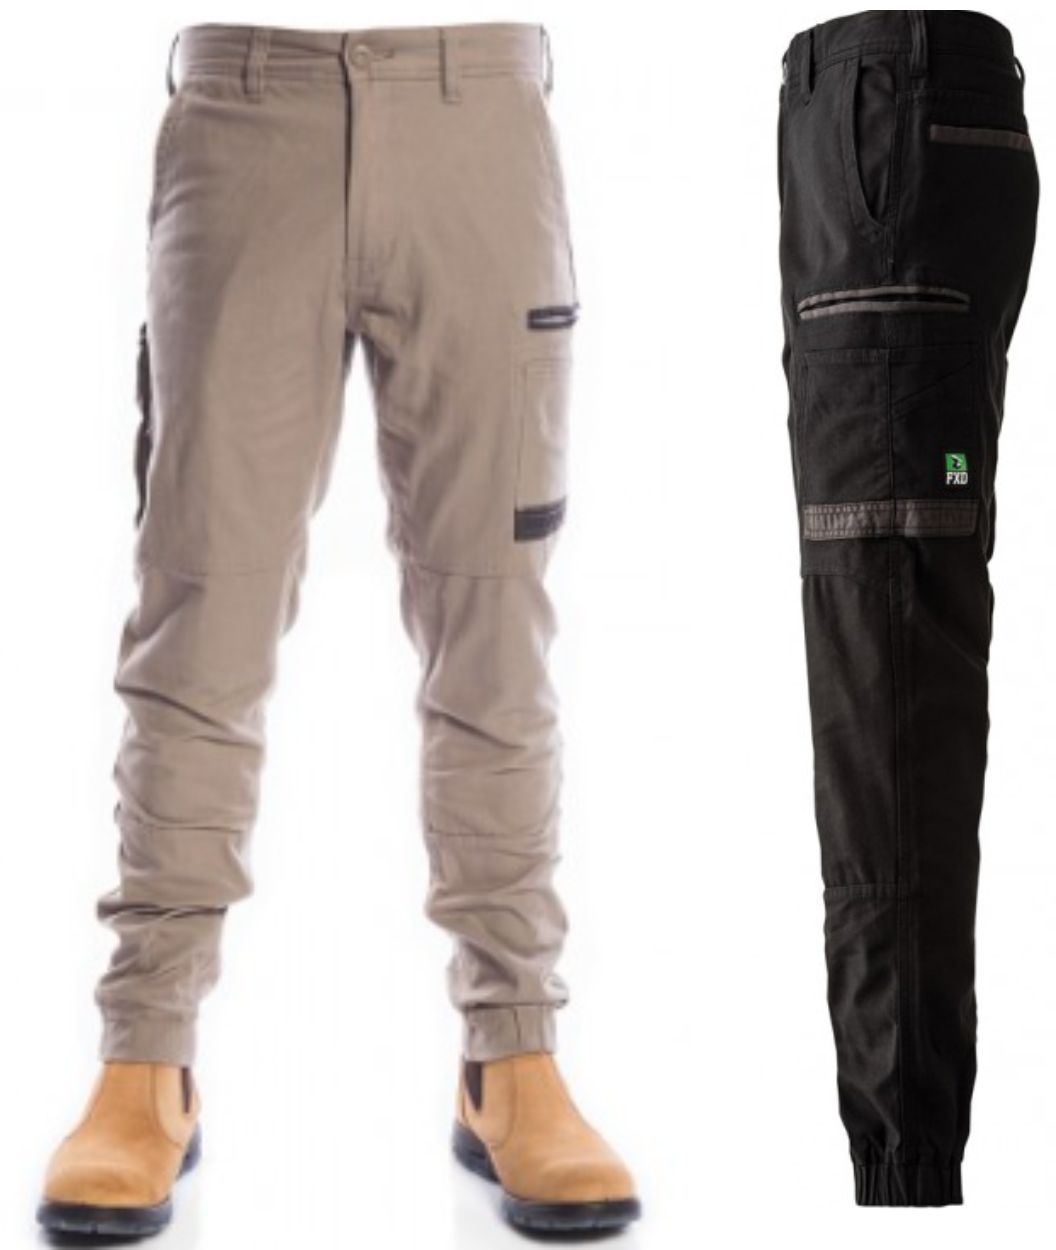 FXD WP-4 Cuffed Stretched jogger pants